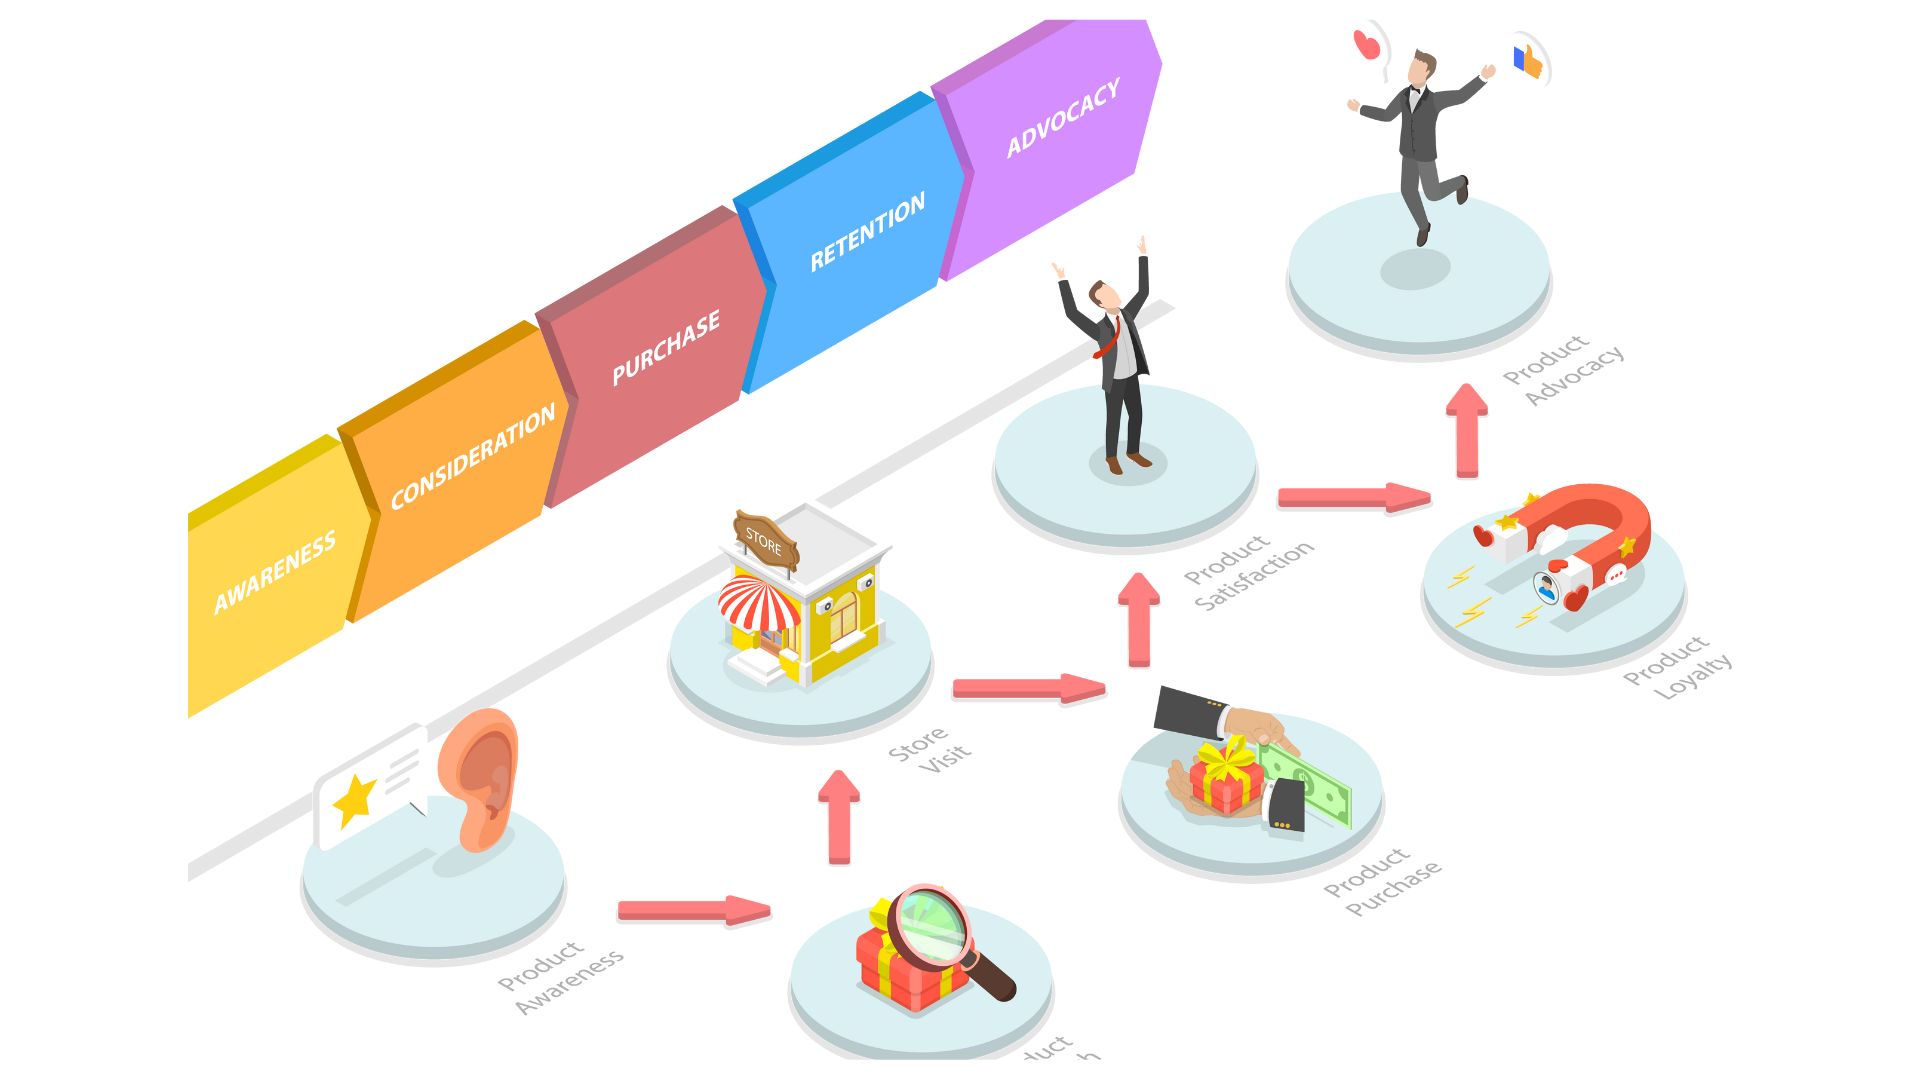 Importance of Customer Experience and Customer Journey Stages